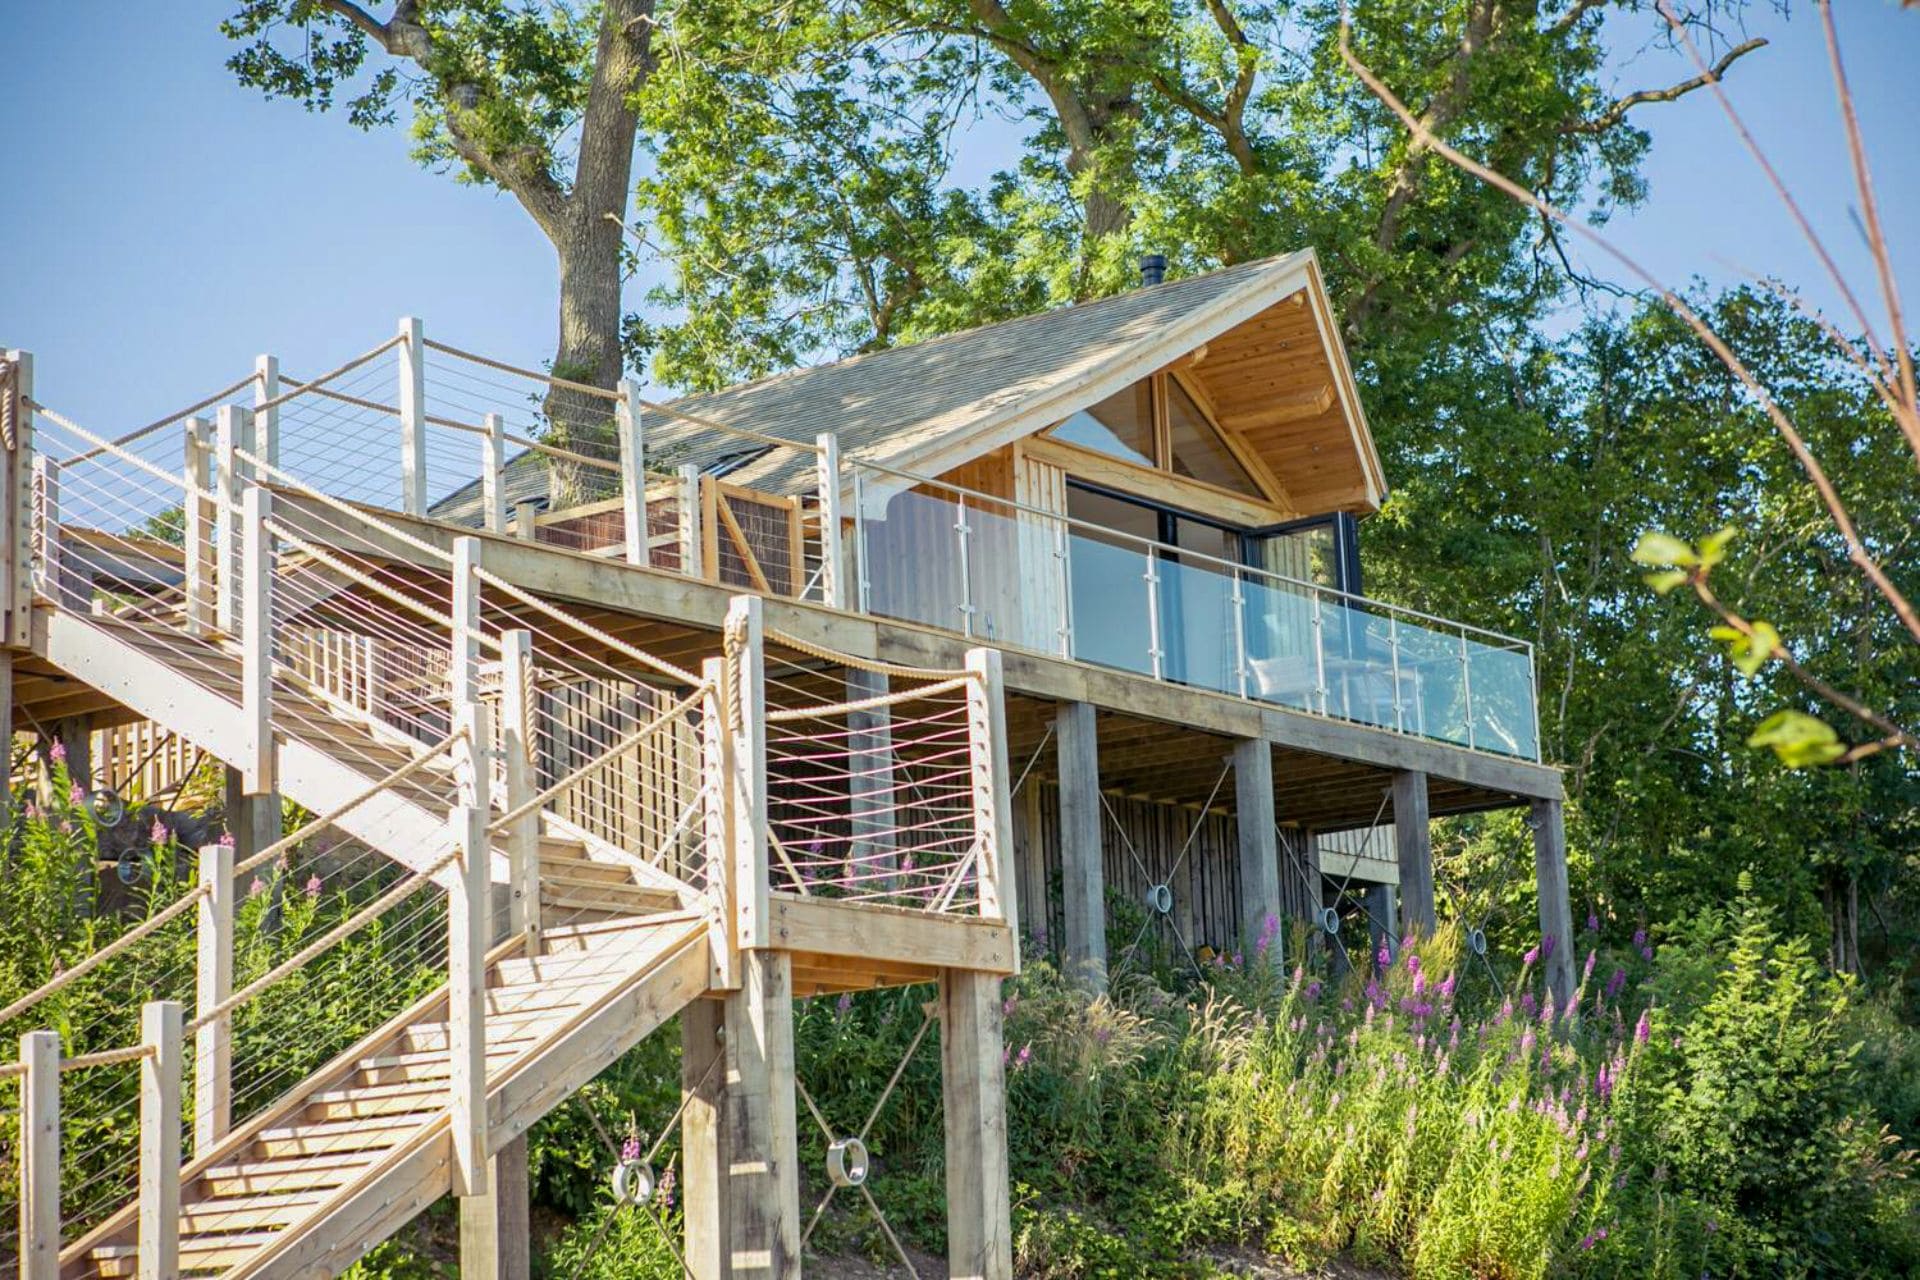 steps-leading-up-to-beach-inspired-treehouse-found-amongst-trees-oaklands-treehouse-welshpool-powys-wales-glamping-with-hot-tub-wales